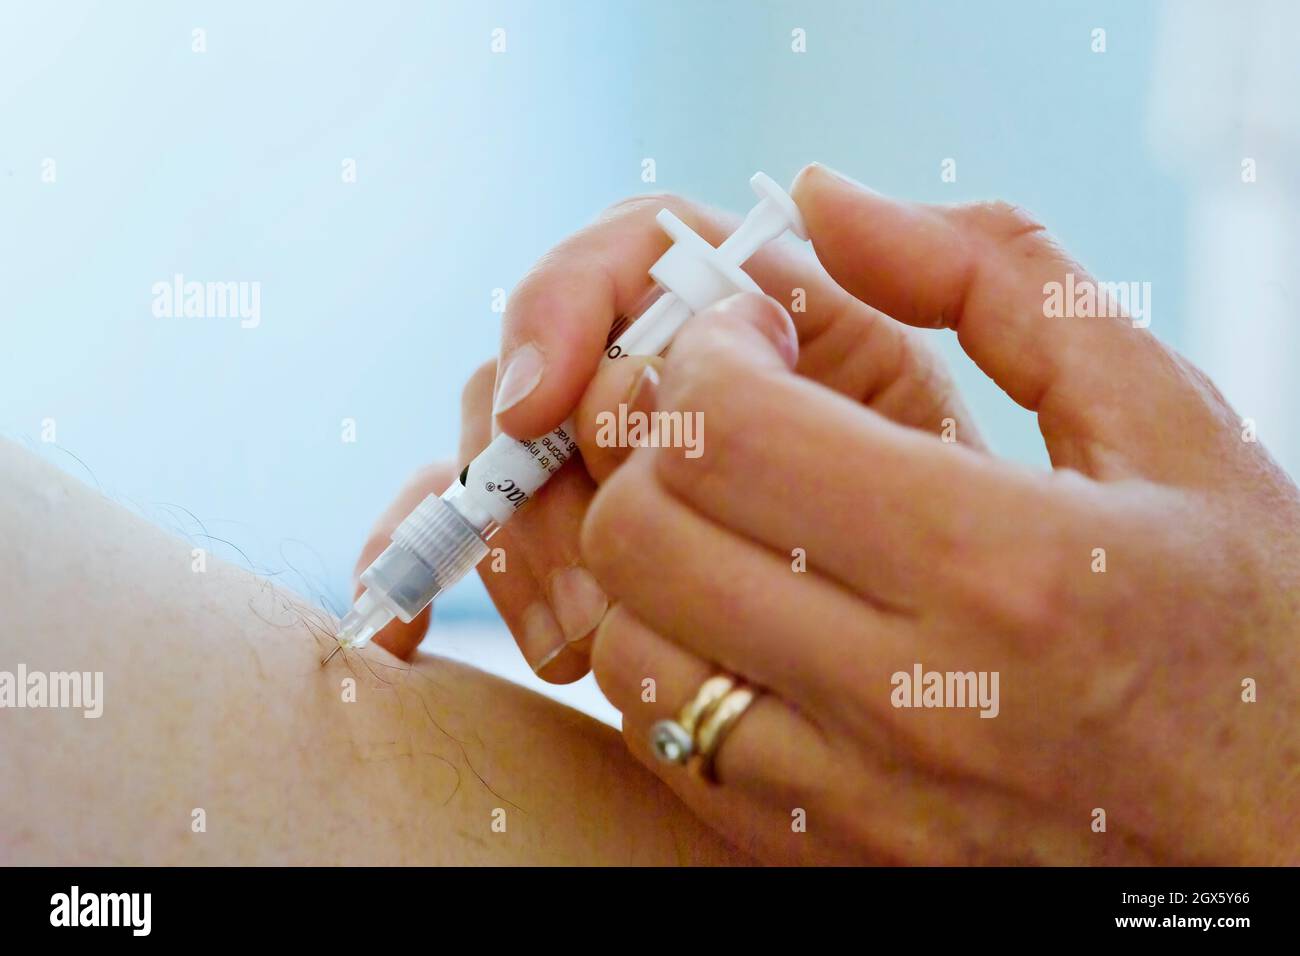 Patient receiveing a vaccine against influenza, delivered by a needle into the upper arm. Stock Photo